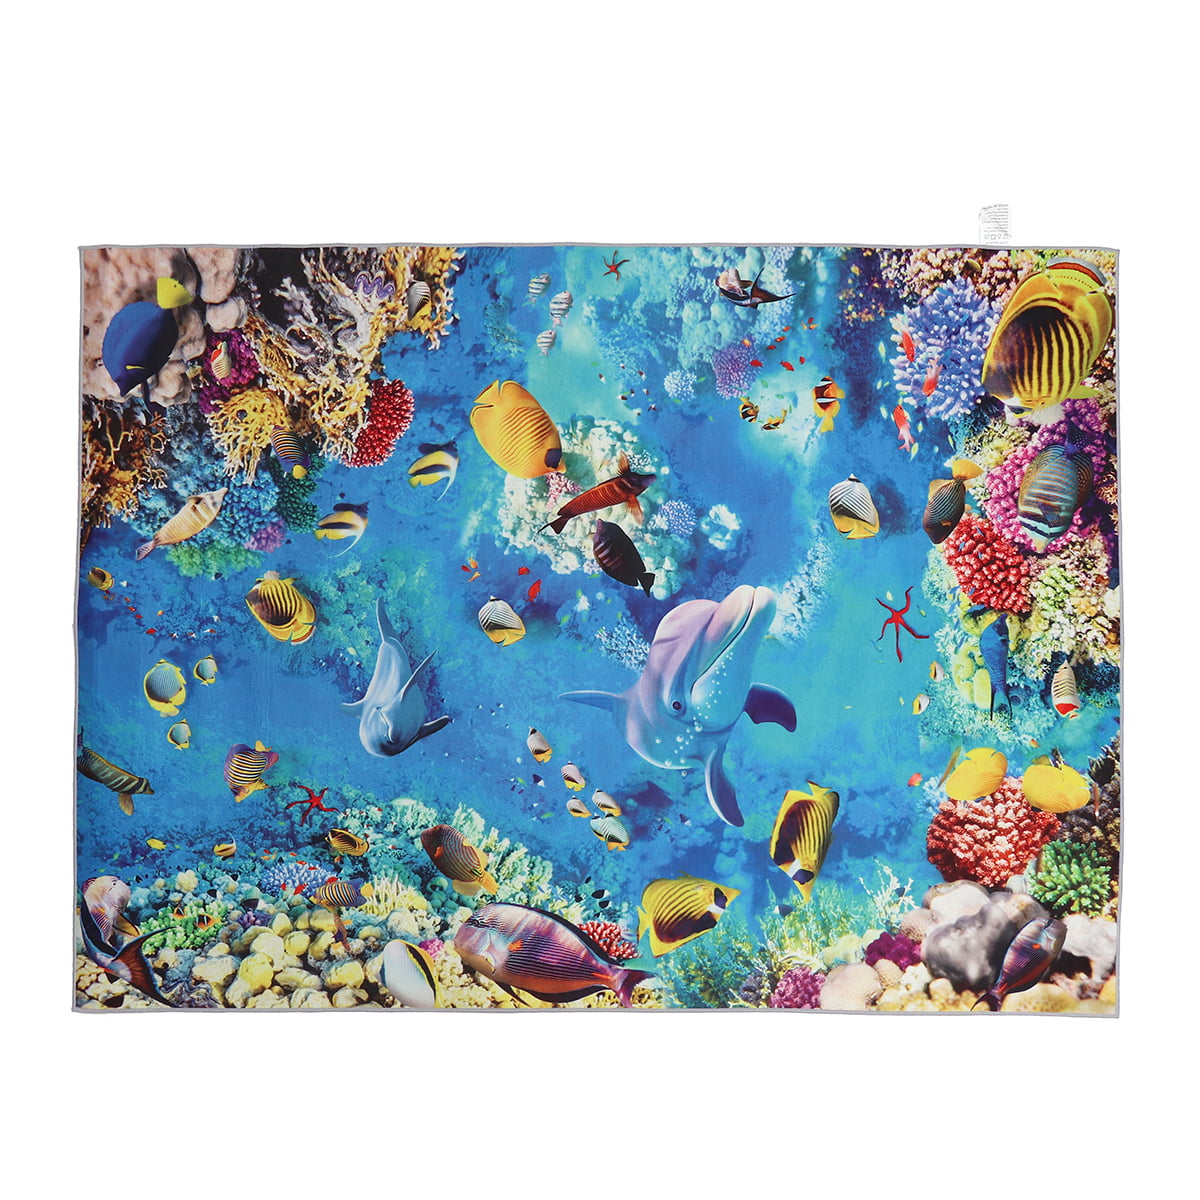 Round Area Rug 3 Feet Coral Reef Troical Fish Non-Slip Circular Area Rugs Kitchen Floor Mat Washable Floor Carpet for High Chair Bedroom Living Room Study Playing 